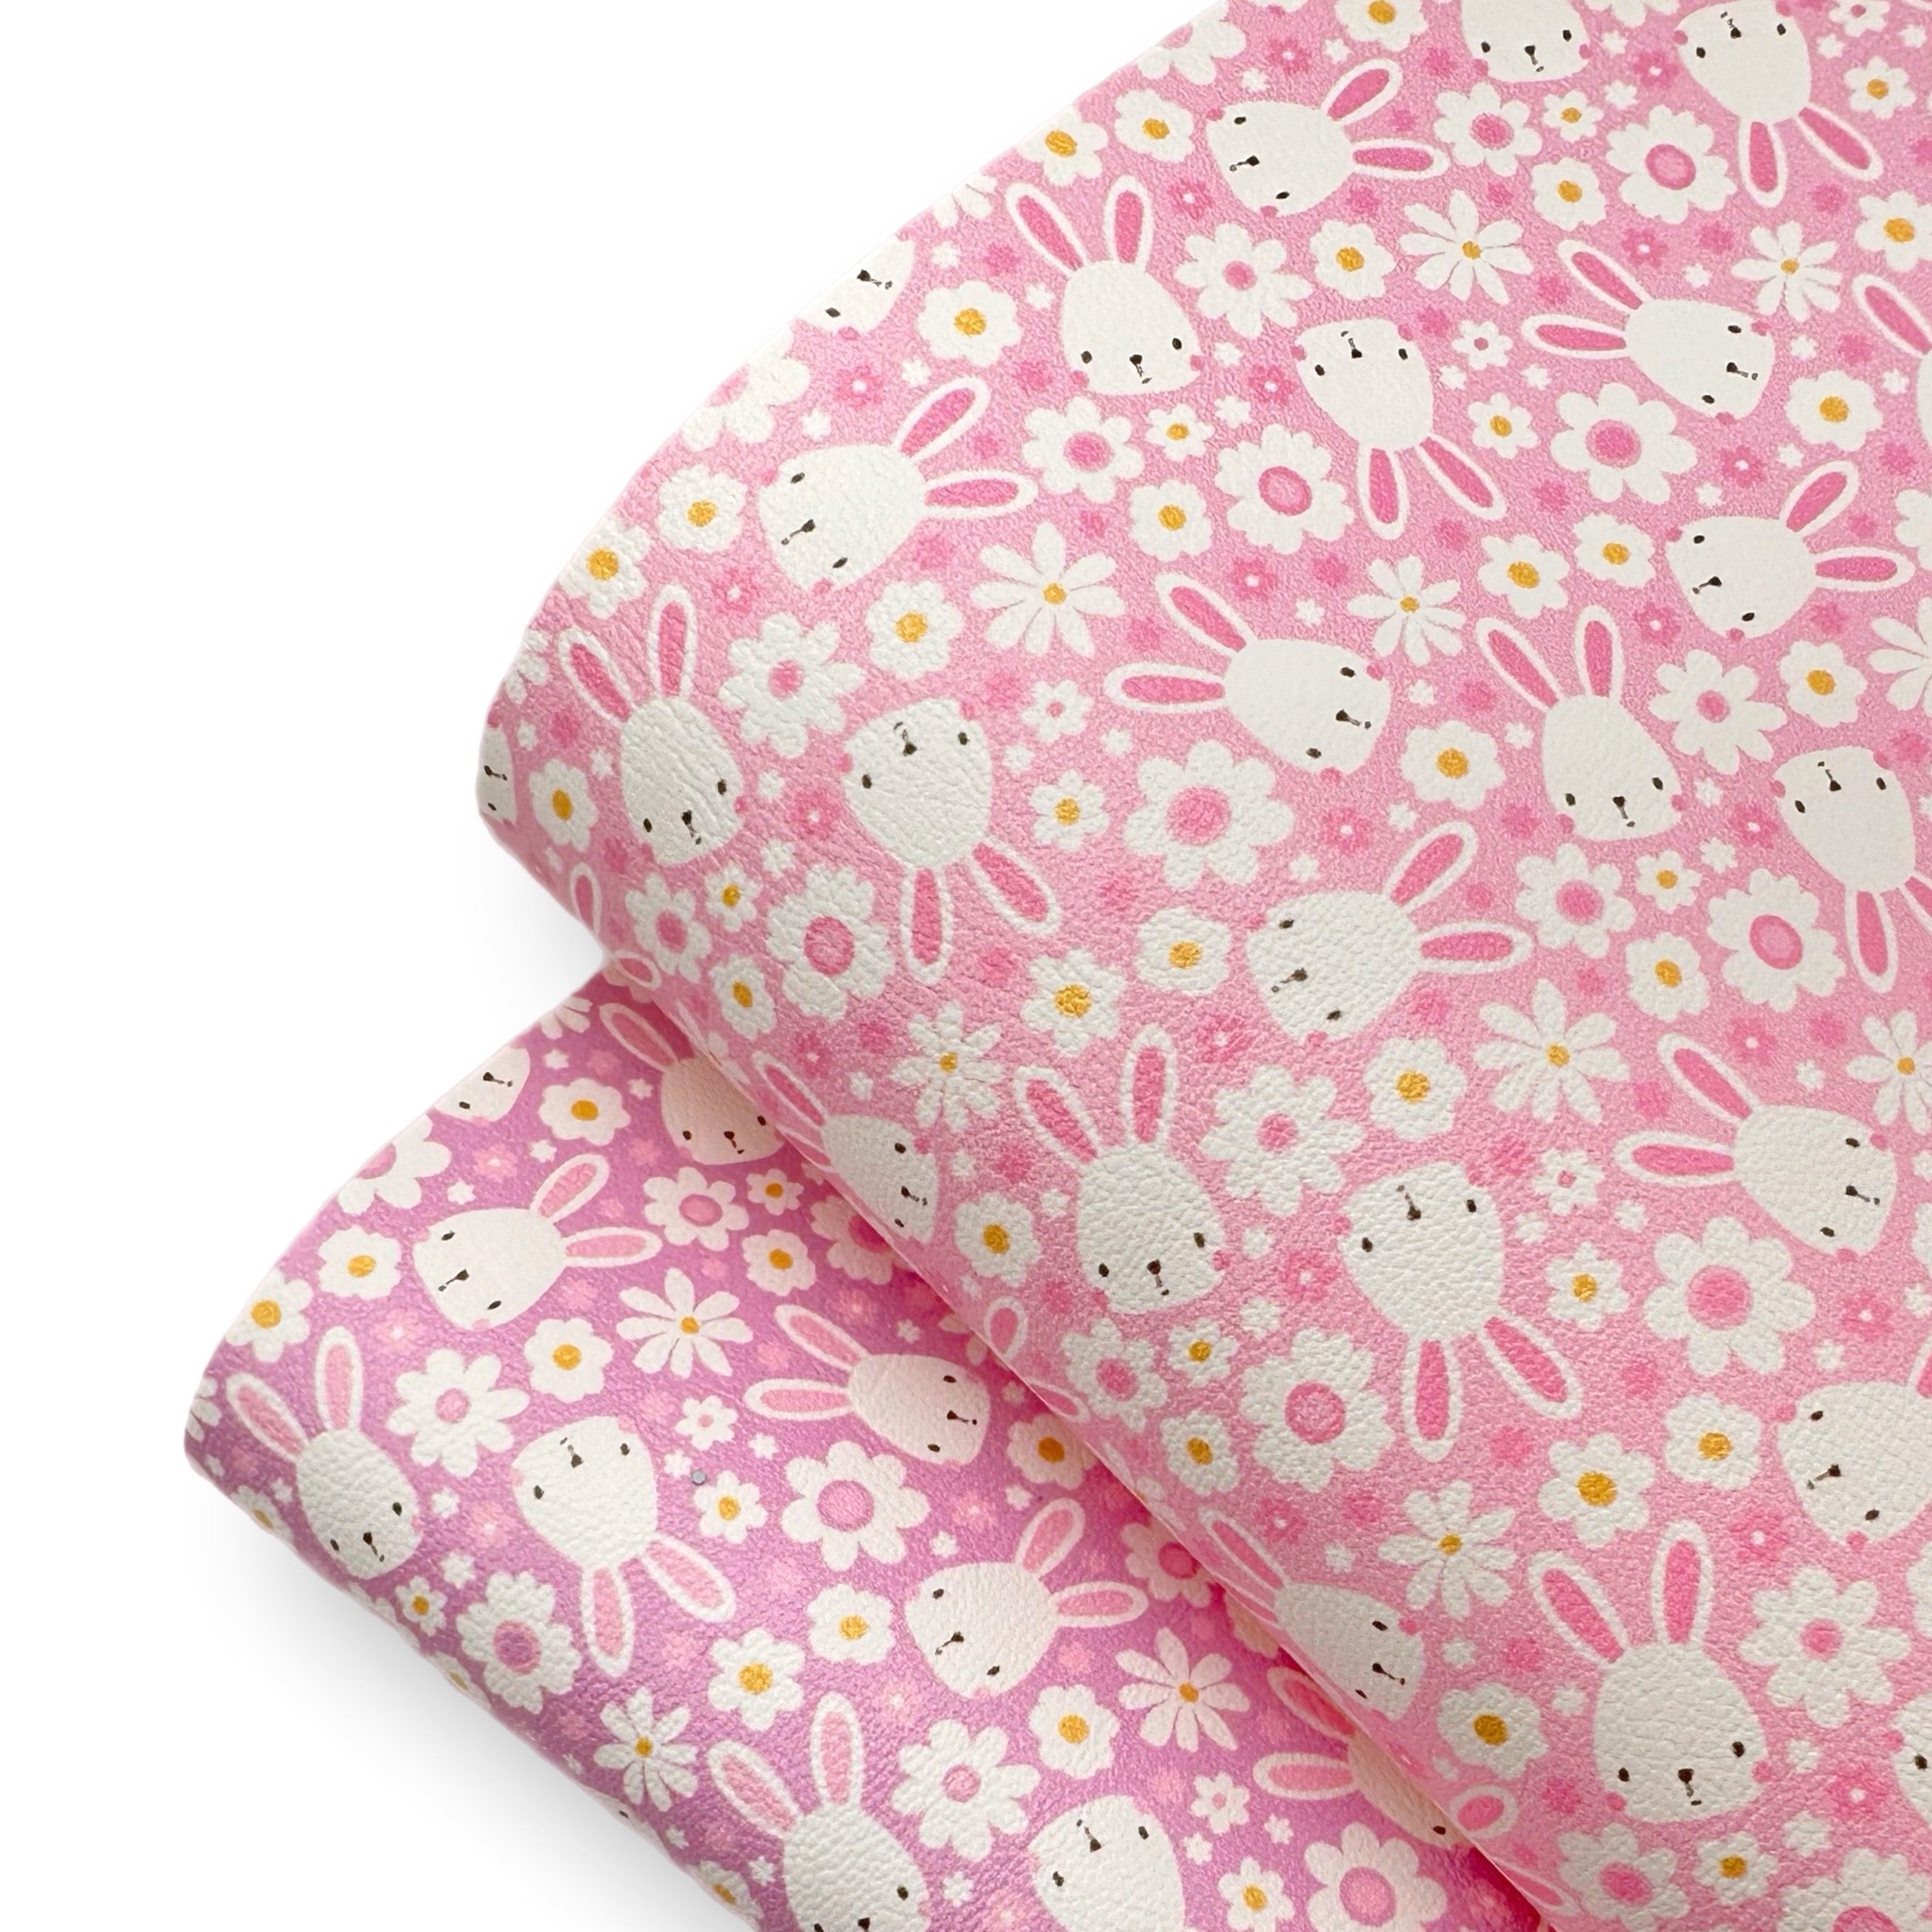 Spring Bunnies Pink Premium Faux Leather Fabric